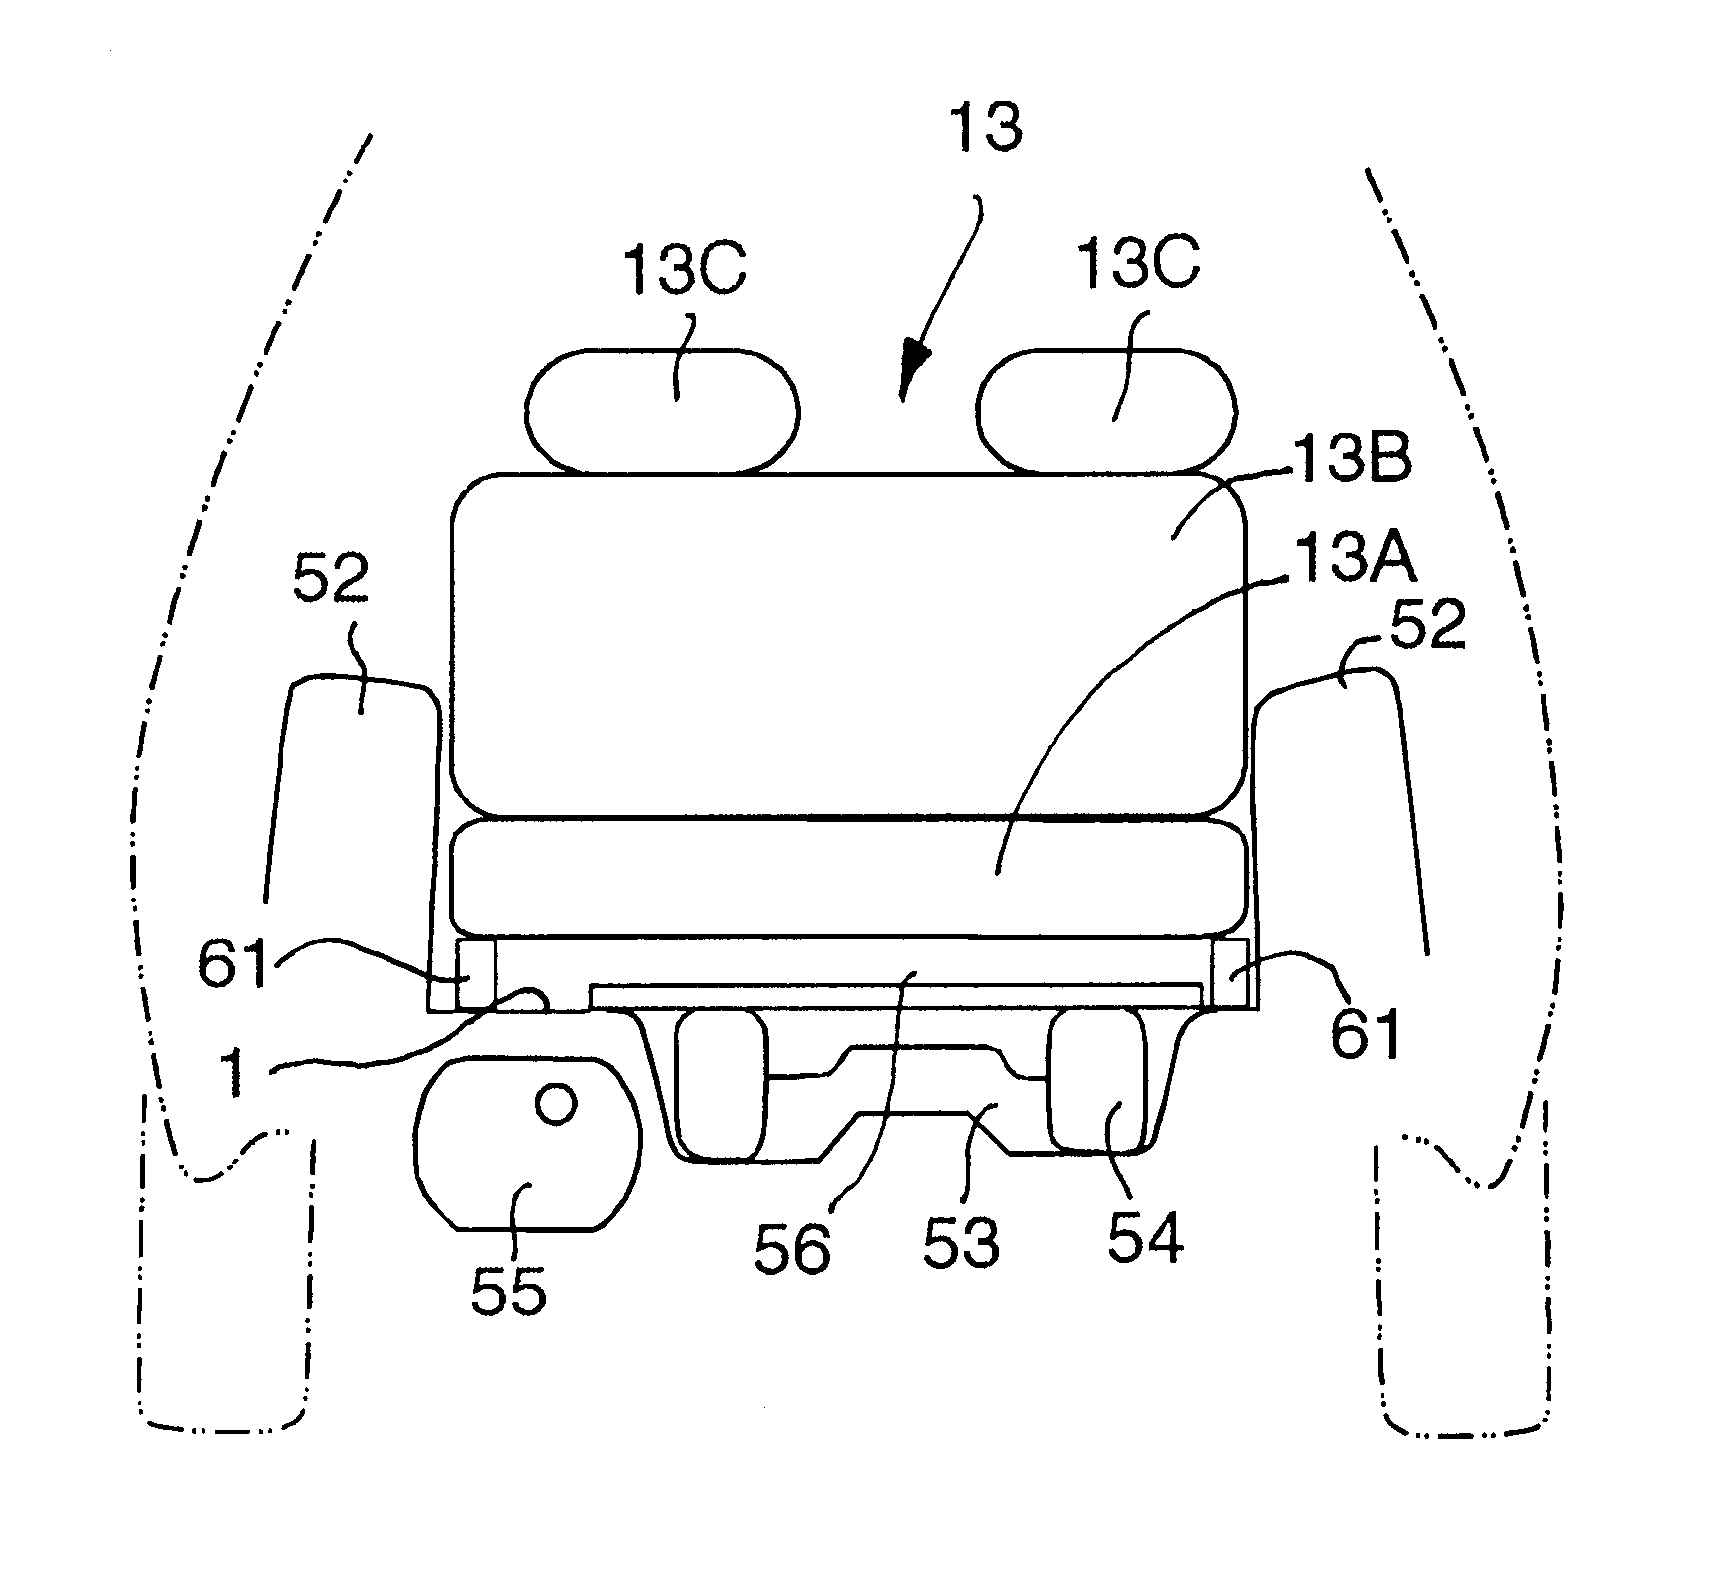 Rear body structure for vehicle